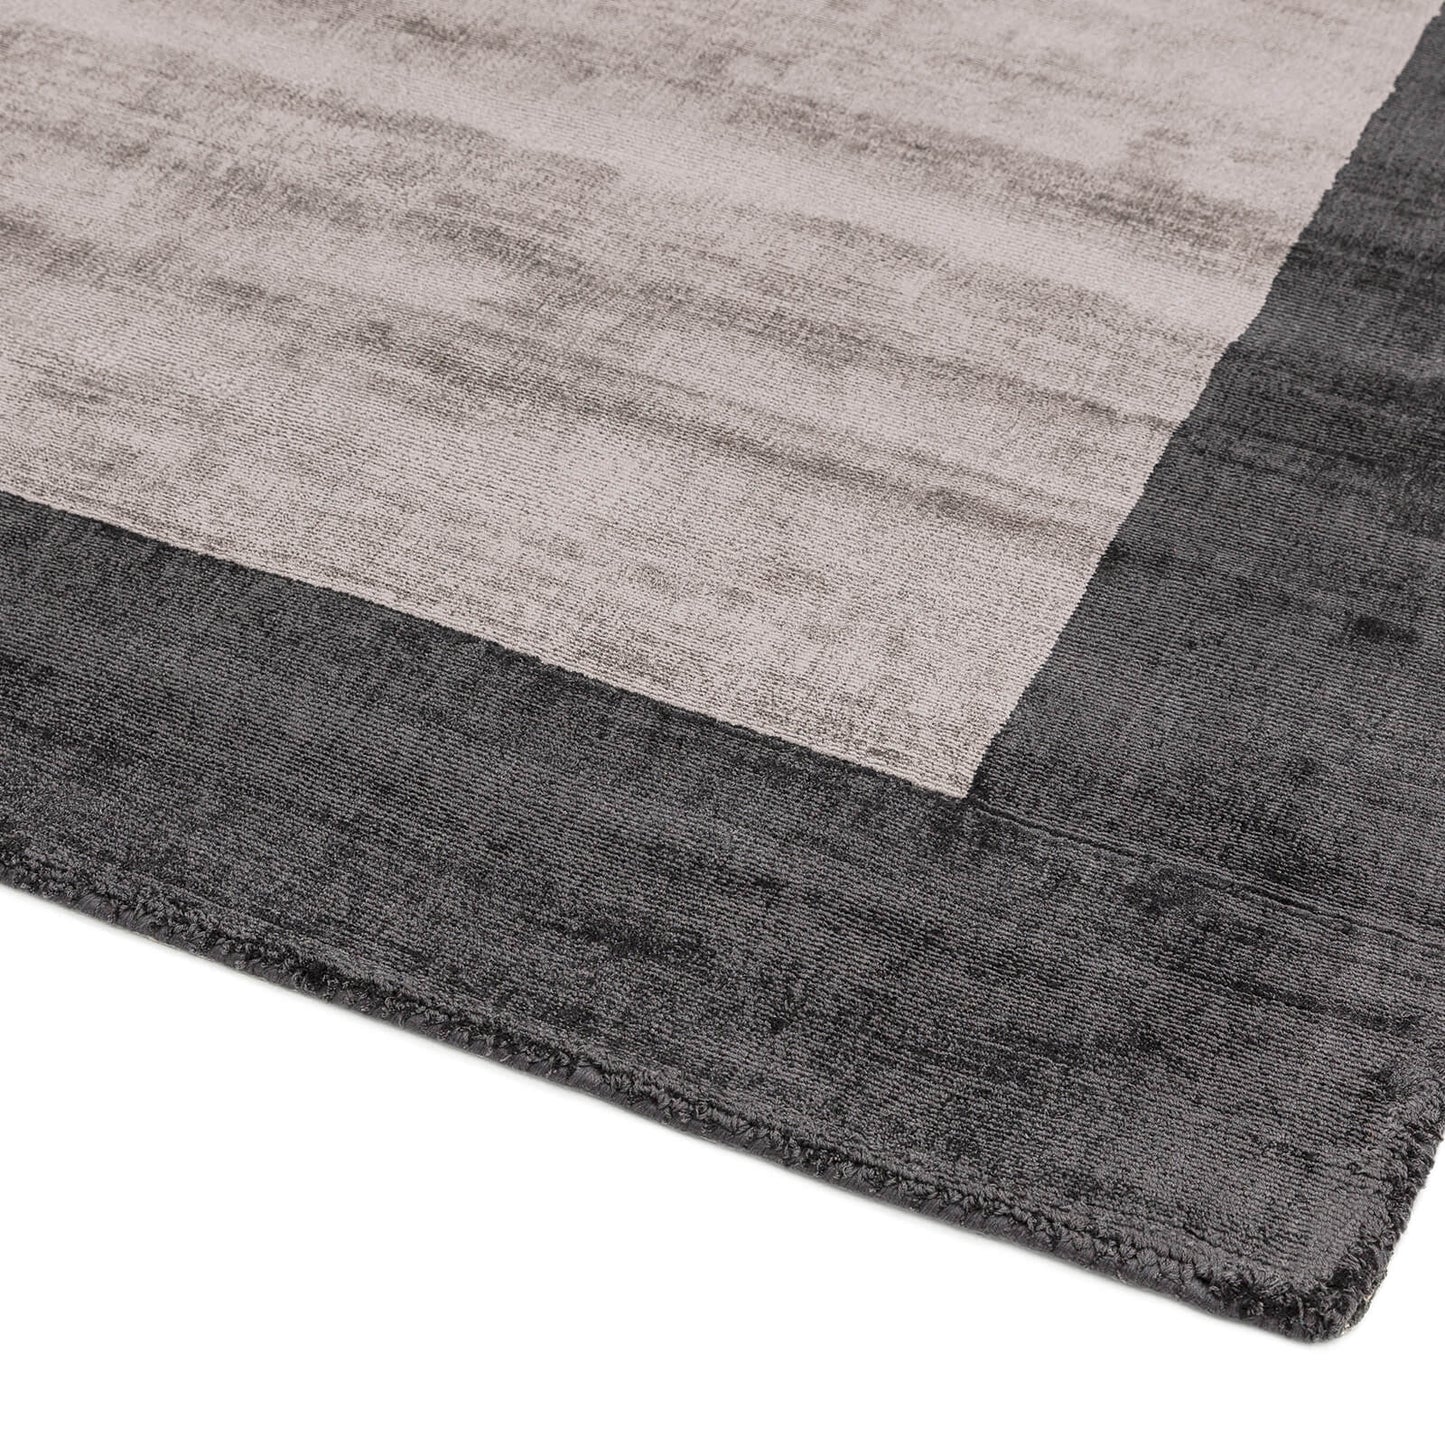 Asiatic Blade Border Charcoal / Silver Square Rug